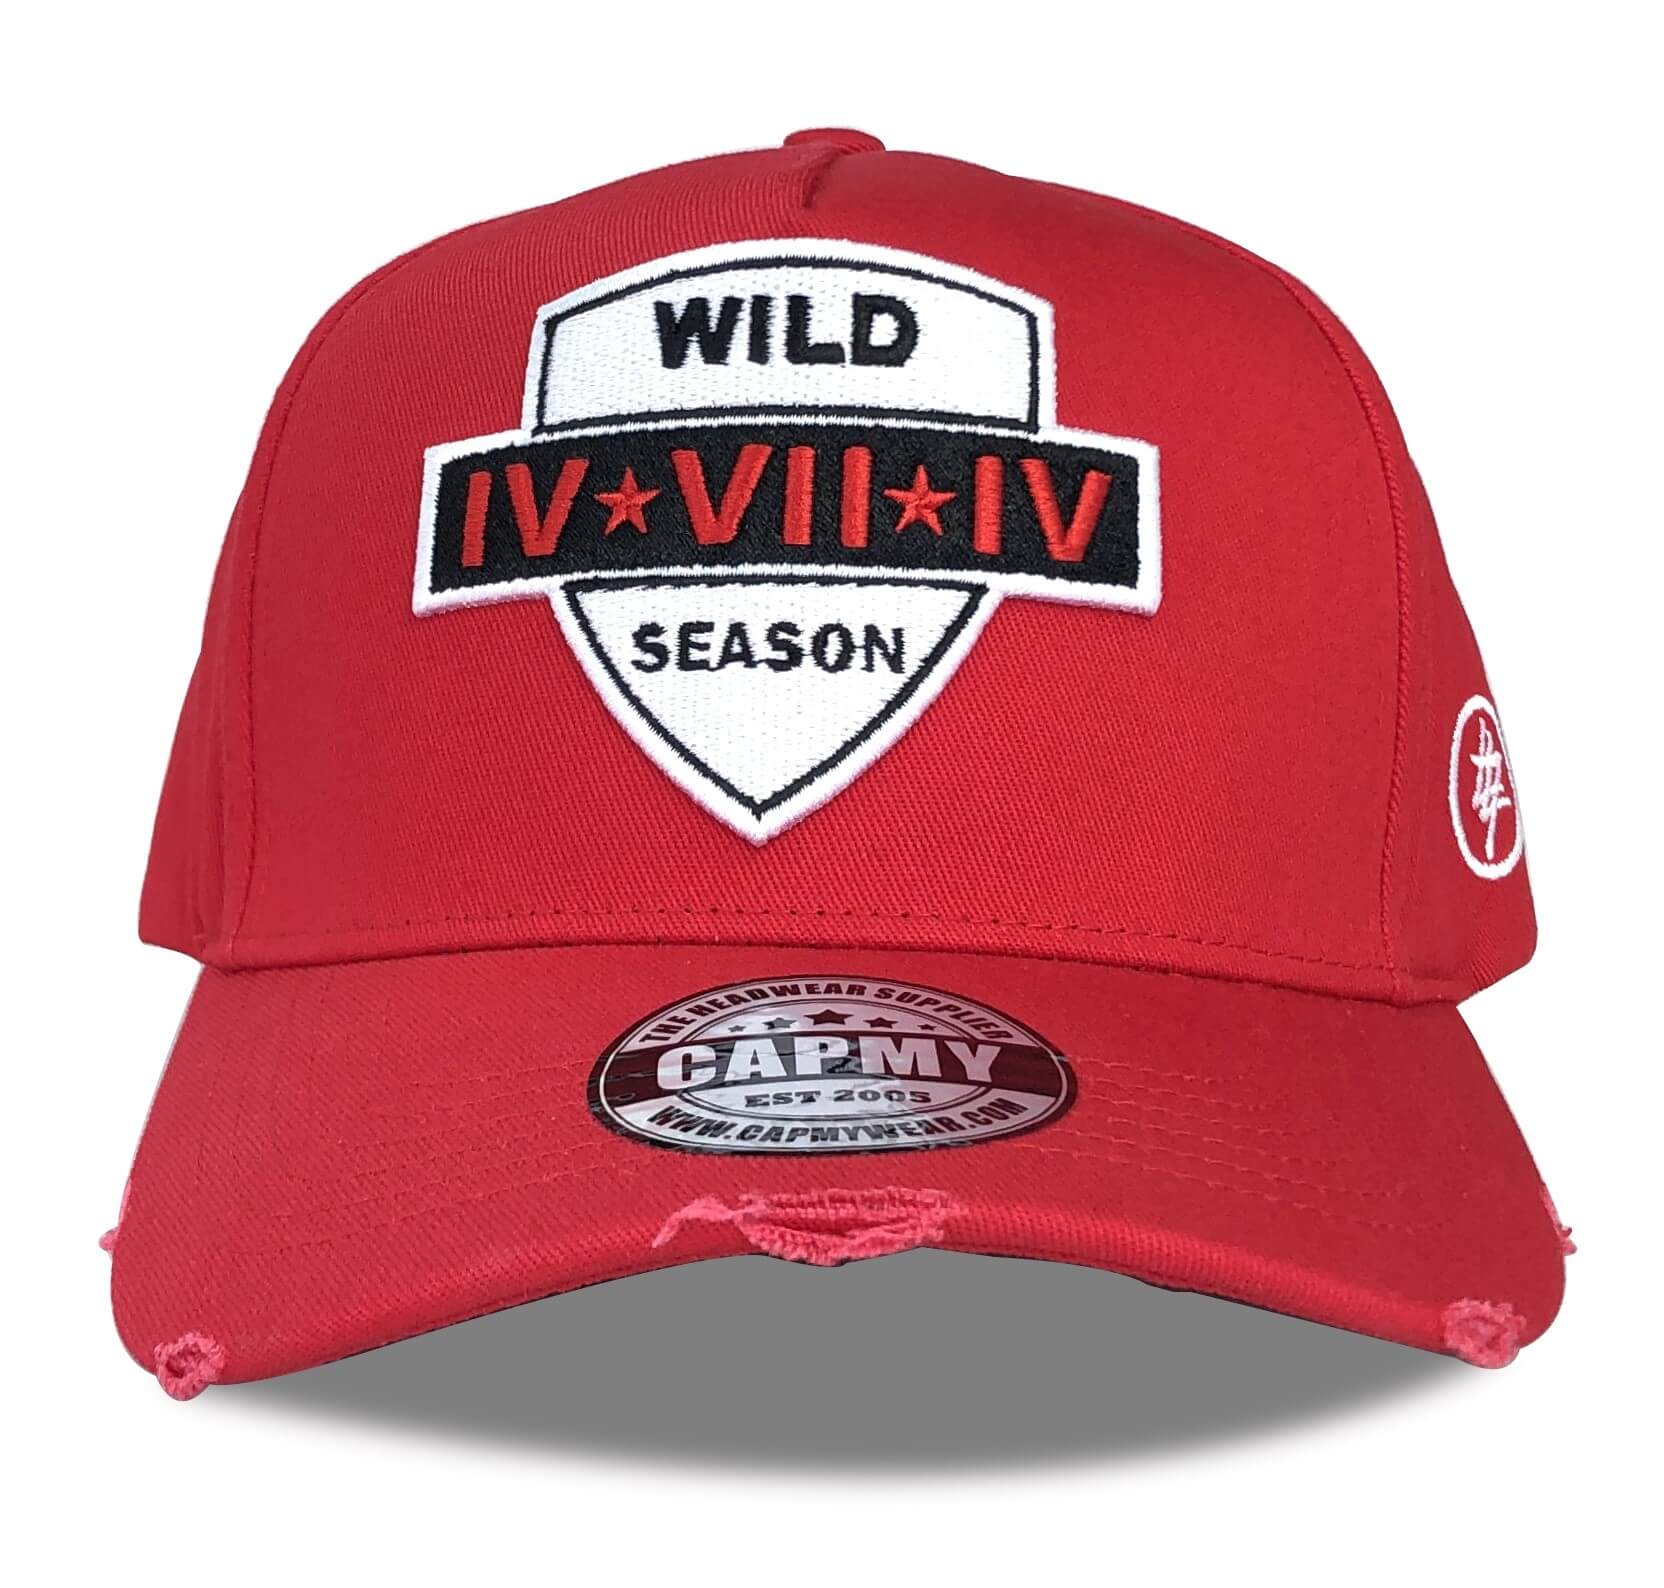 CMC-1126(High Quality Outdoor Red Cotton 5 Panel Caps 3D Embroidery Distressed Vintage Rip Baseball Cap Manufacturer)